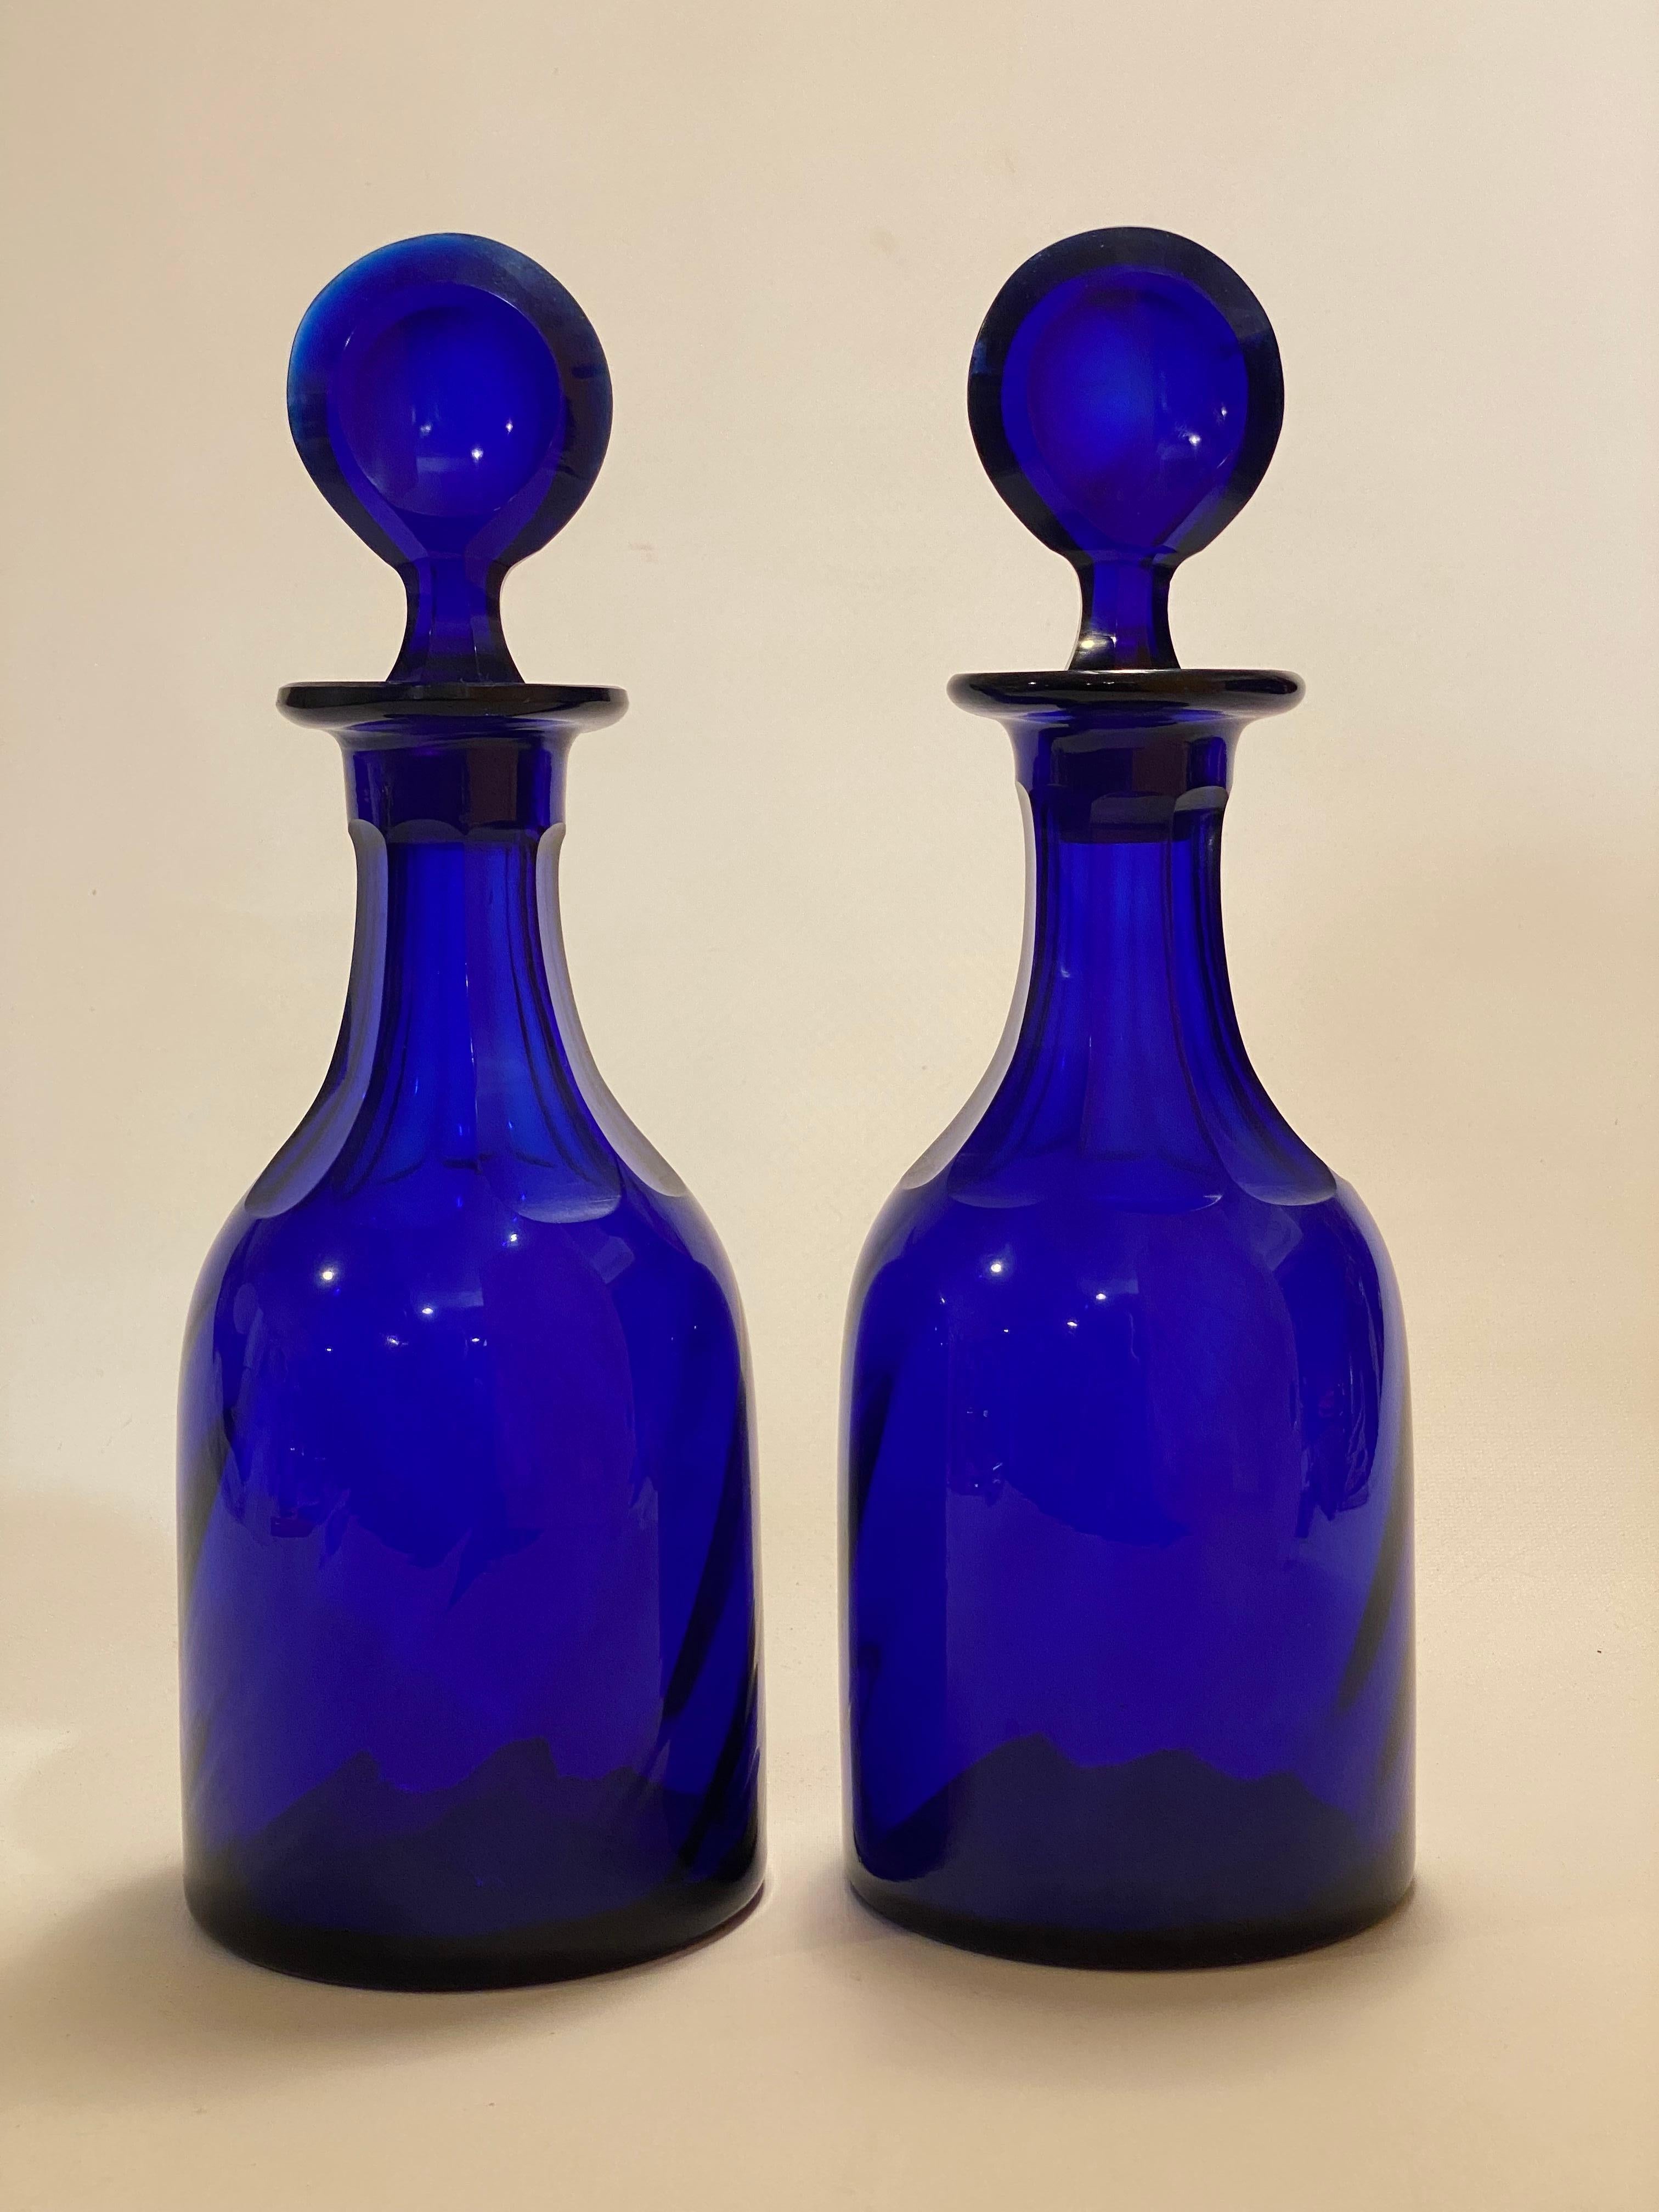 A pair of fantastic carved and polished cobalt glass bottles with stoppers. Beautiful deep deep blue. Polished pontils. The blown bottles have faceted and polished necks and the stoppers have a polished concave design. The pair clearly needs to be